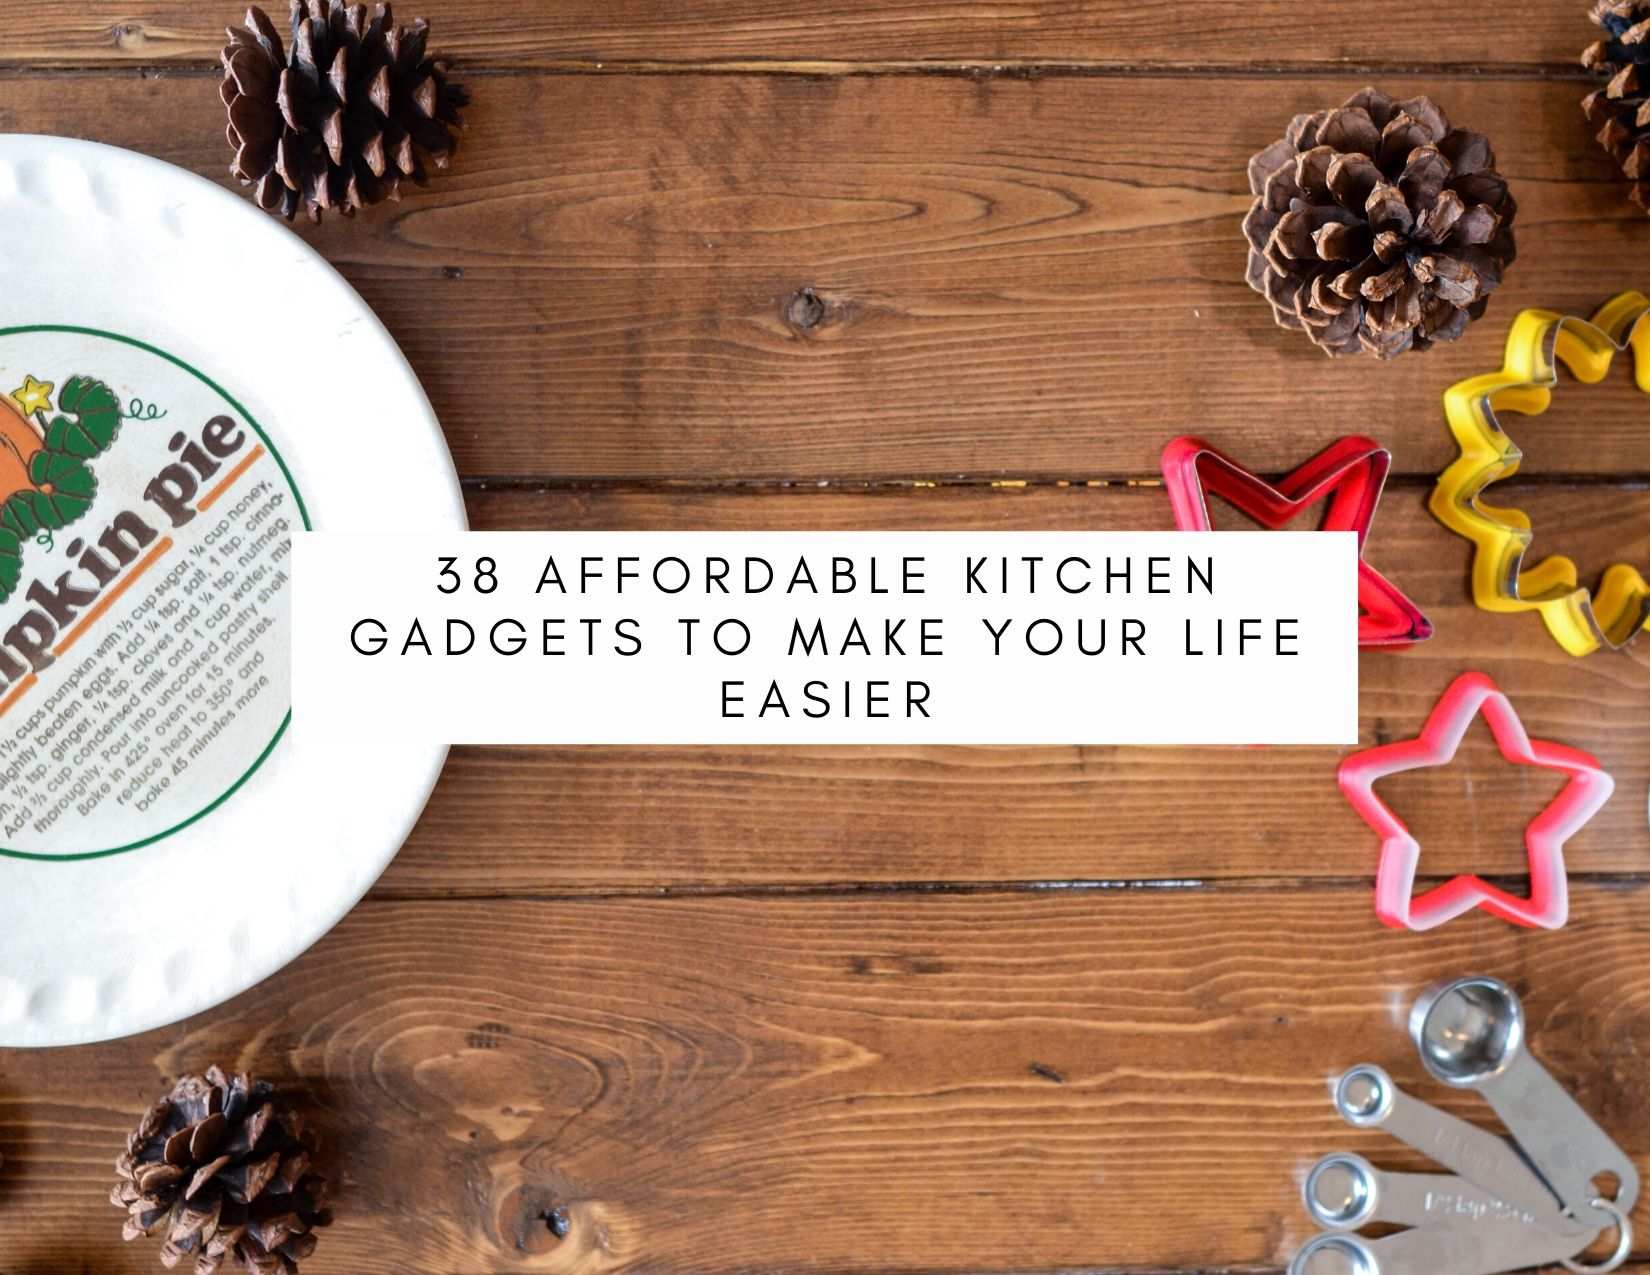 38 Affordable Kitchen Gadgets To Make Your Life Easier